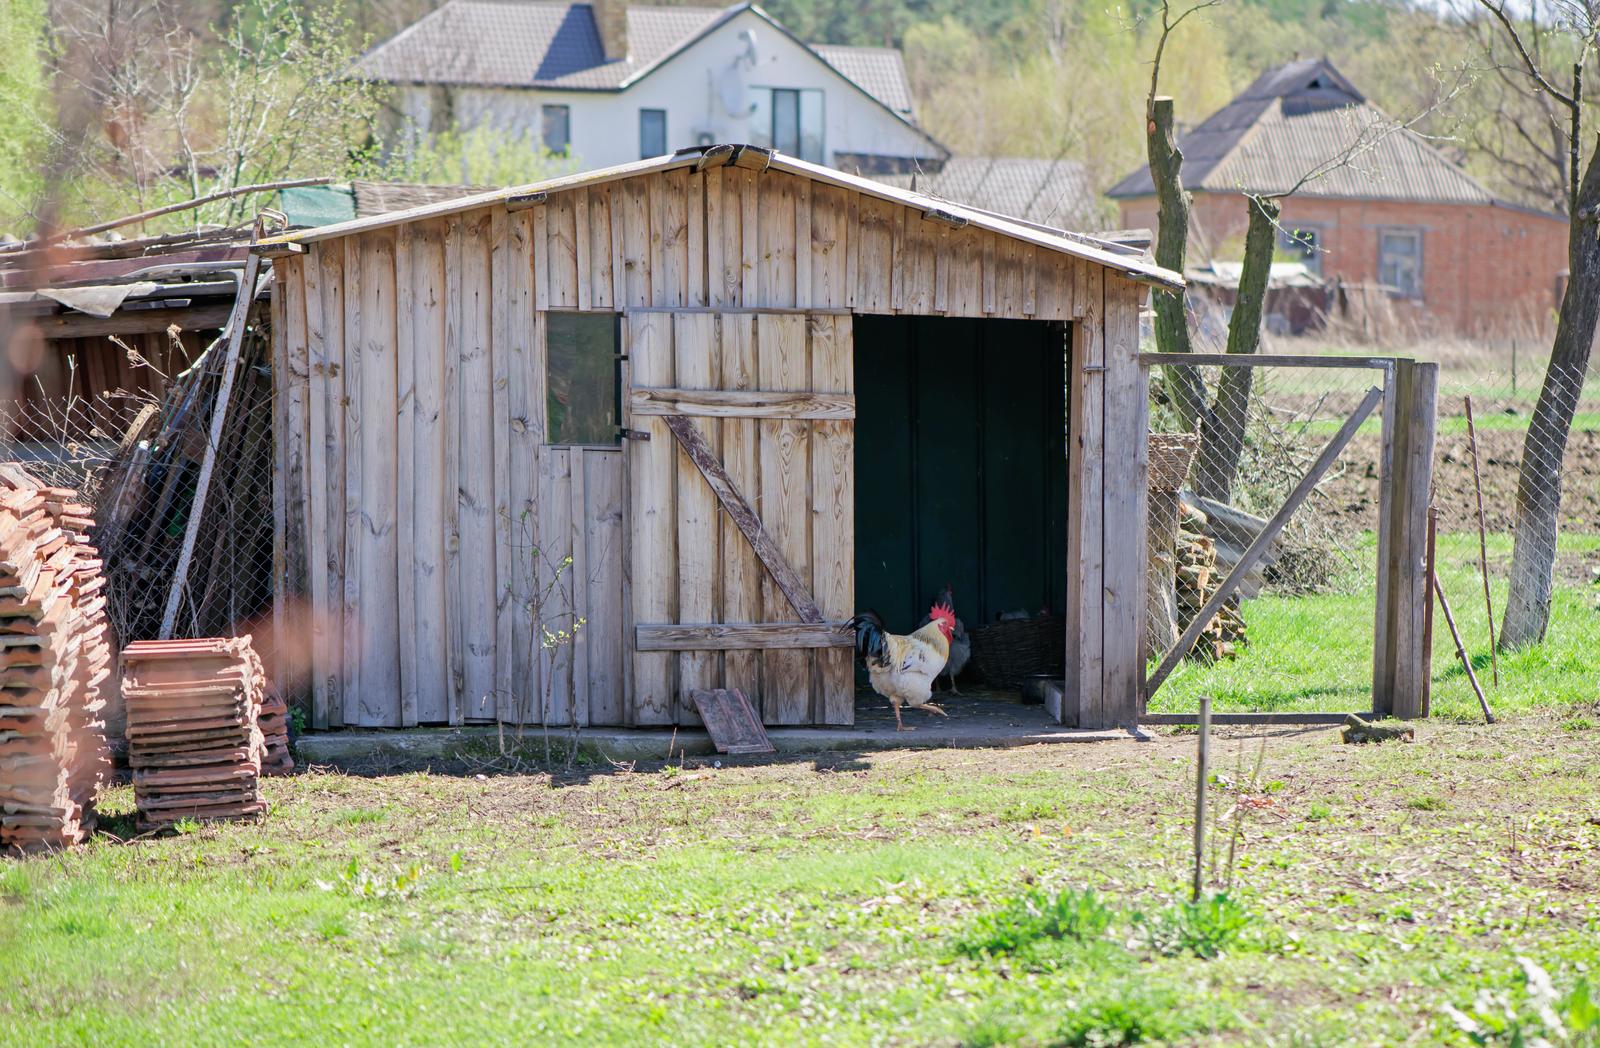 A chicken standing by the entrance of a chicken shed.